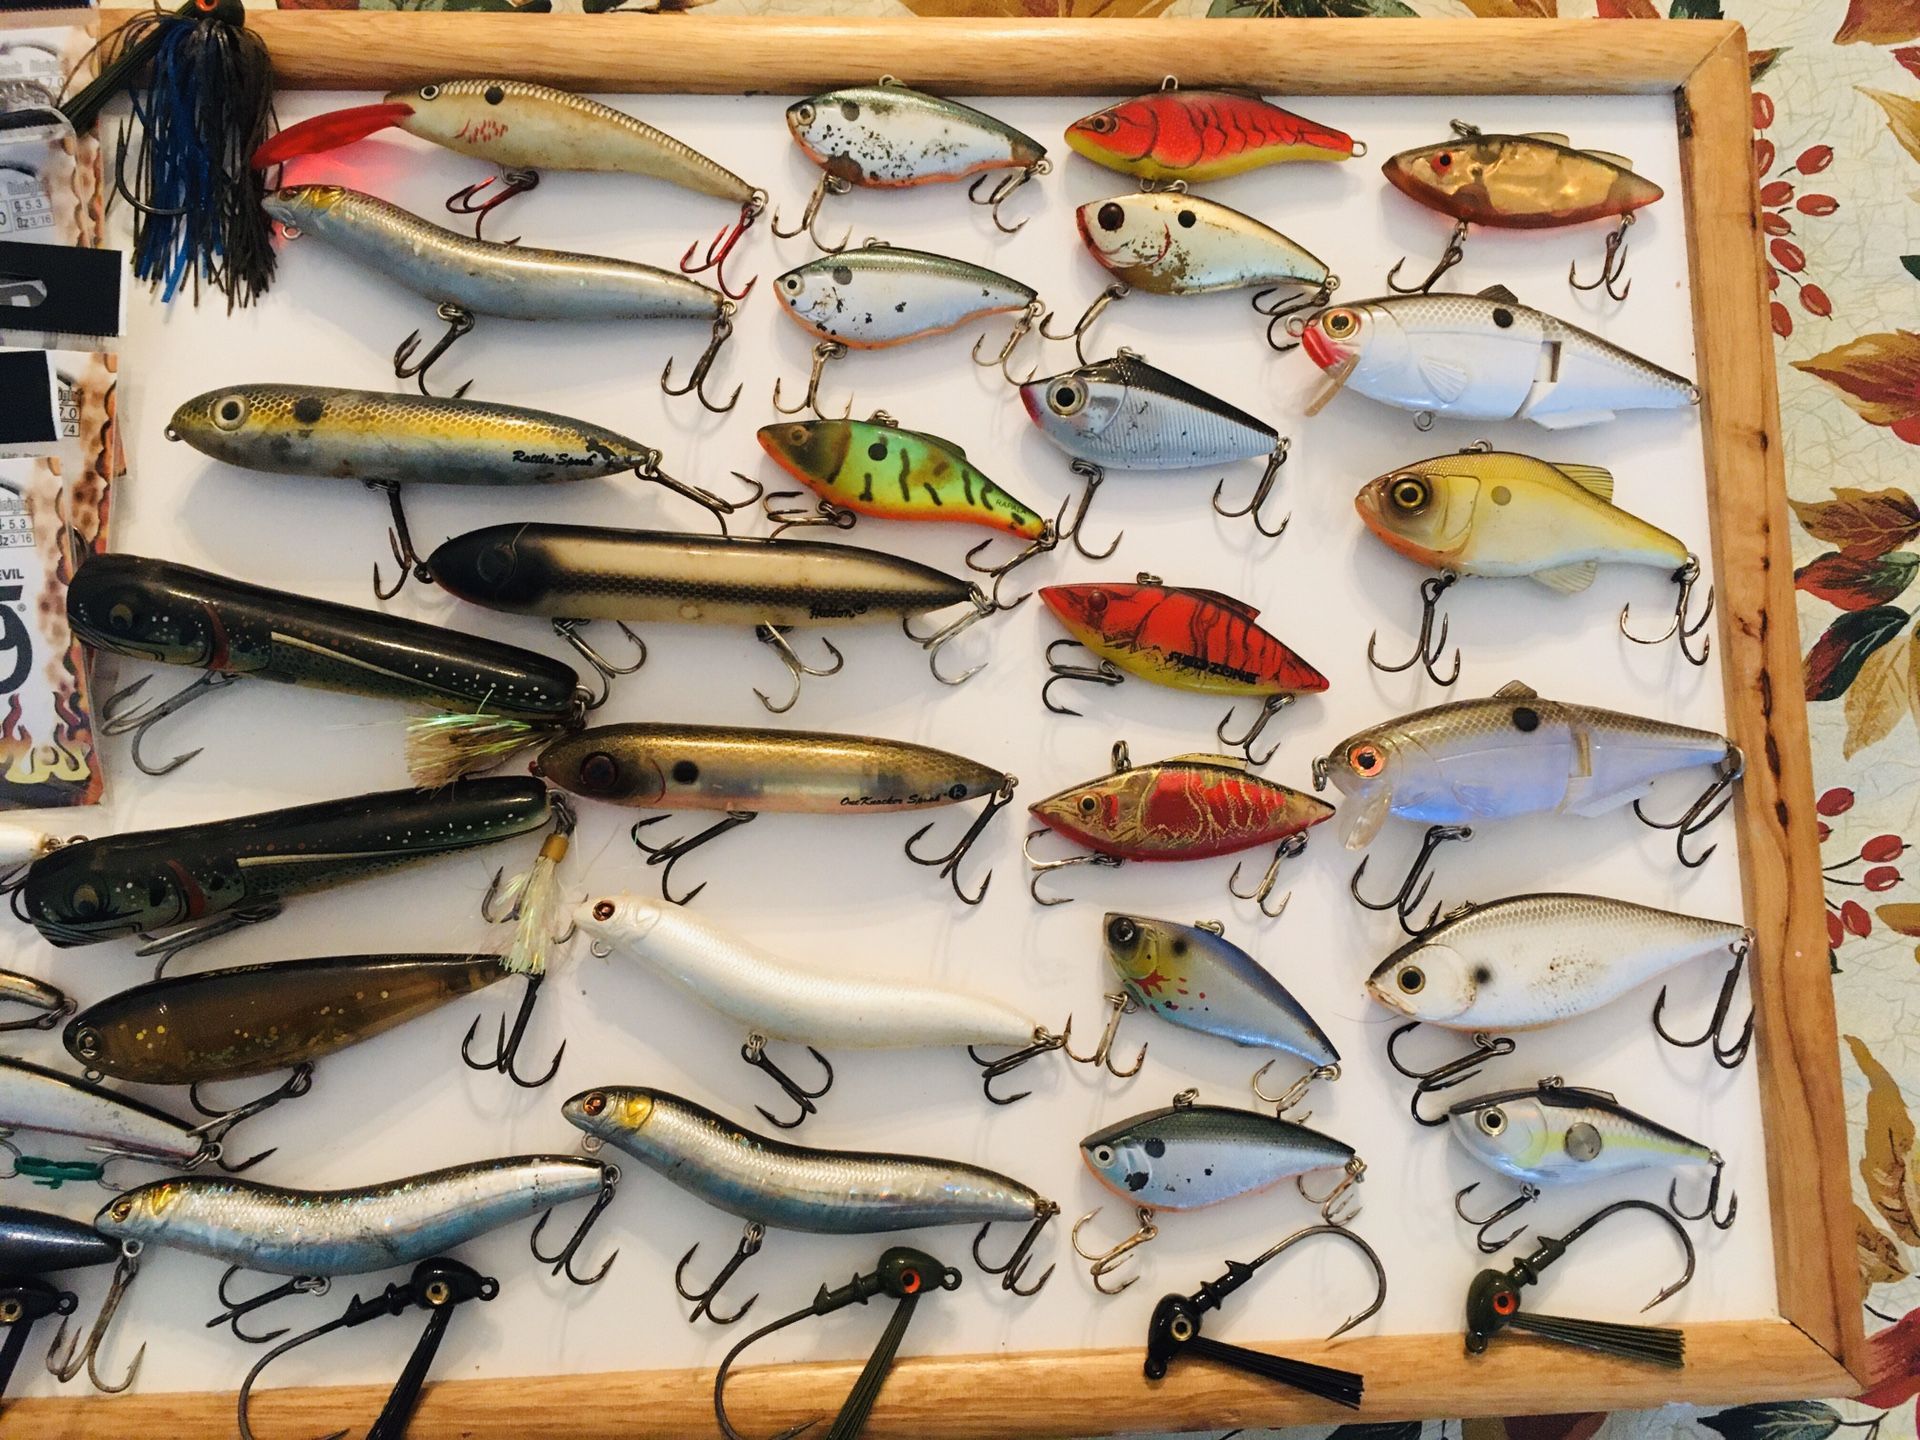 Fishing lures all for $15